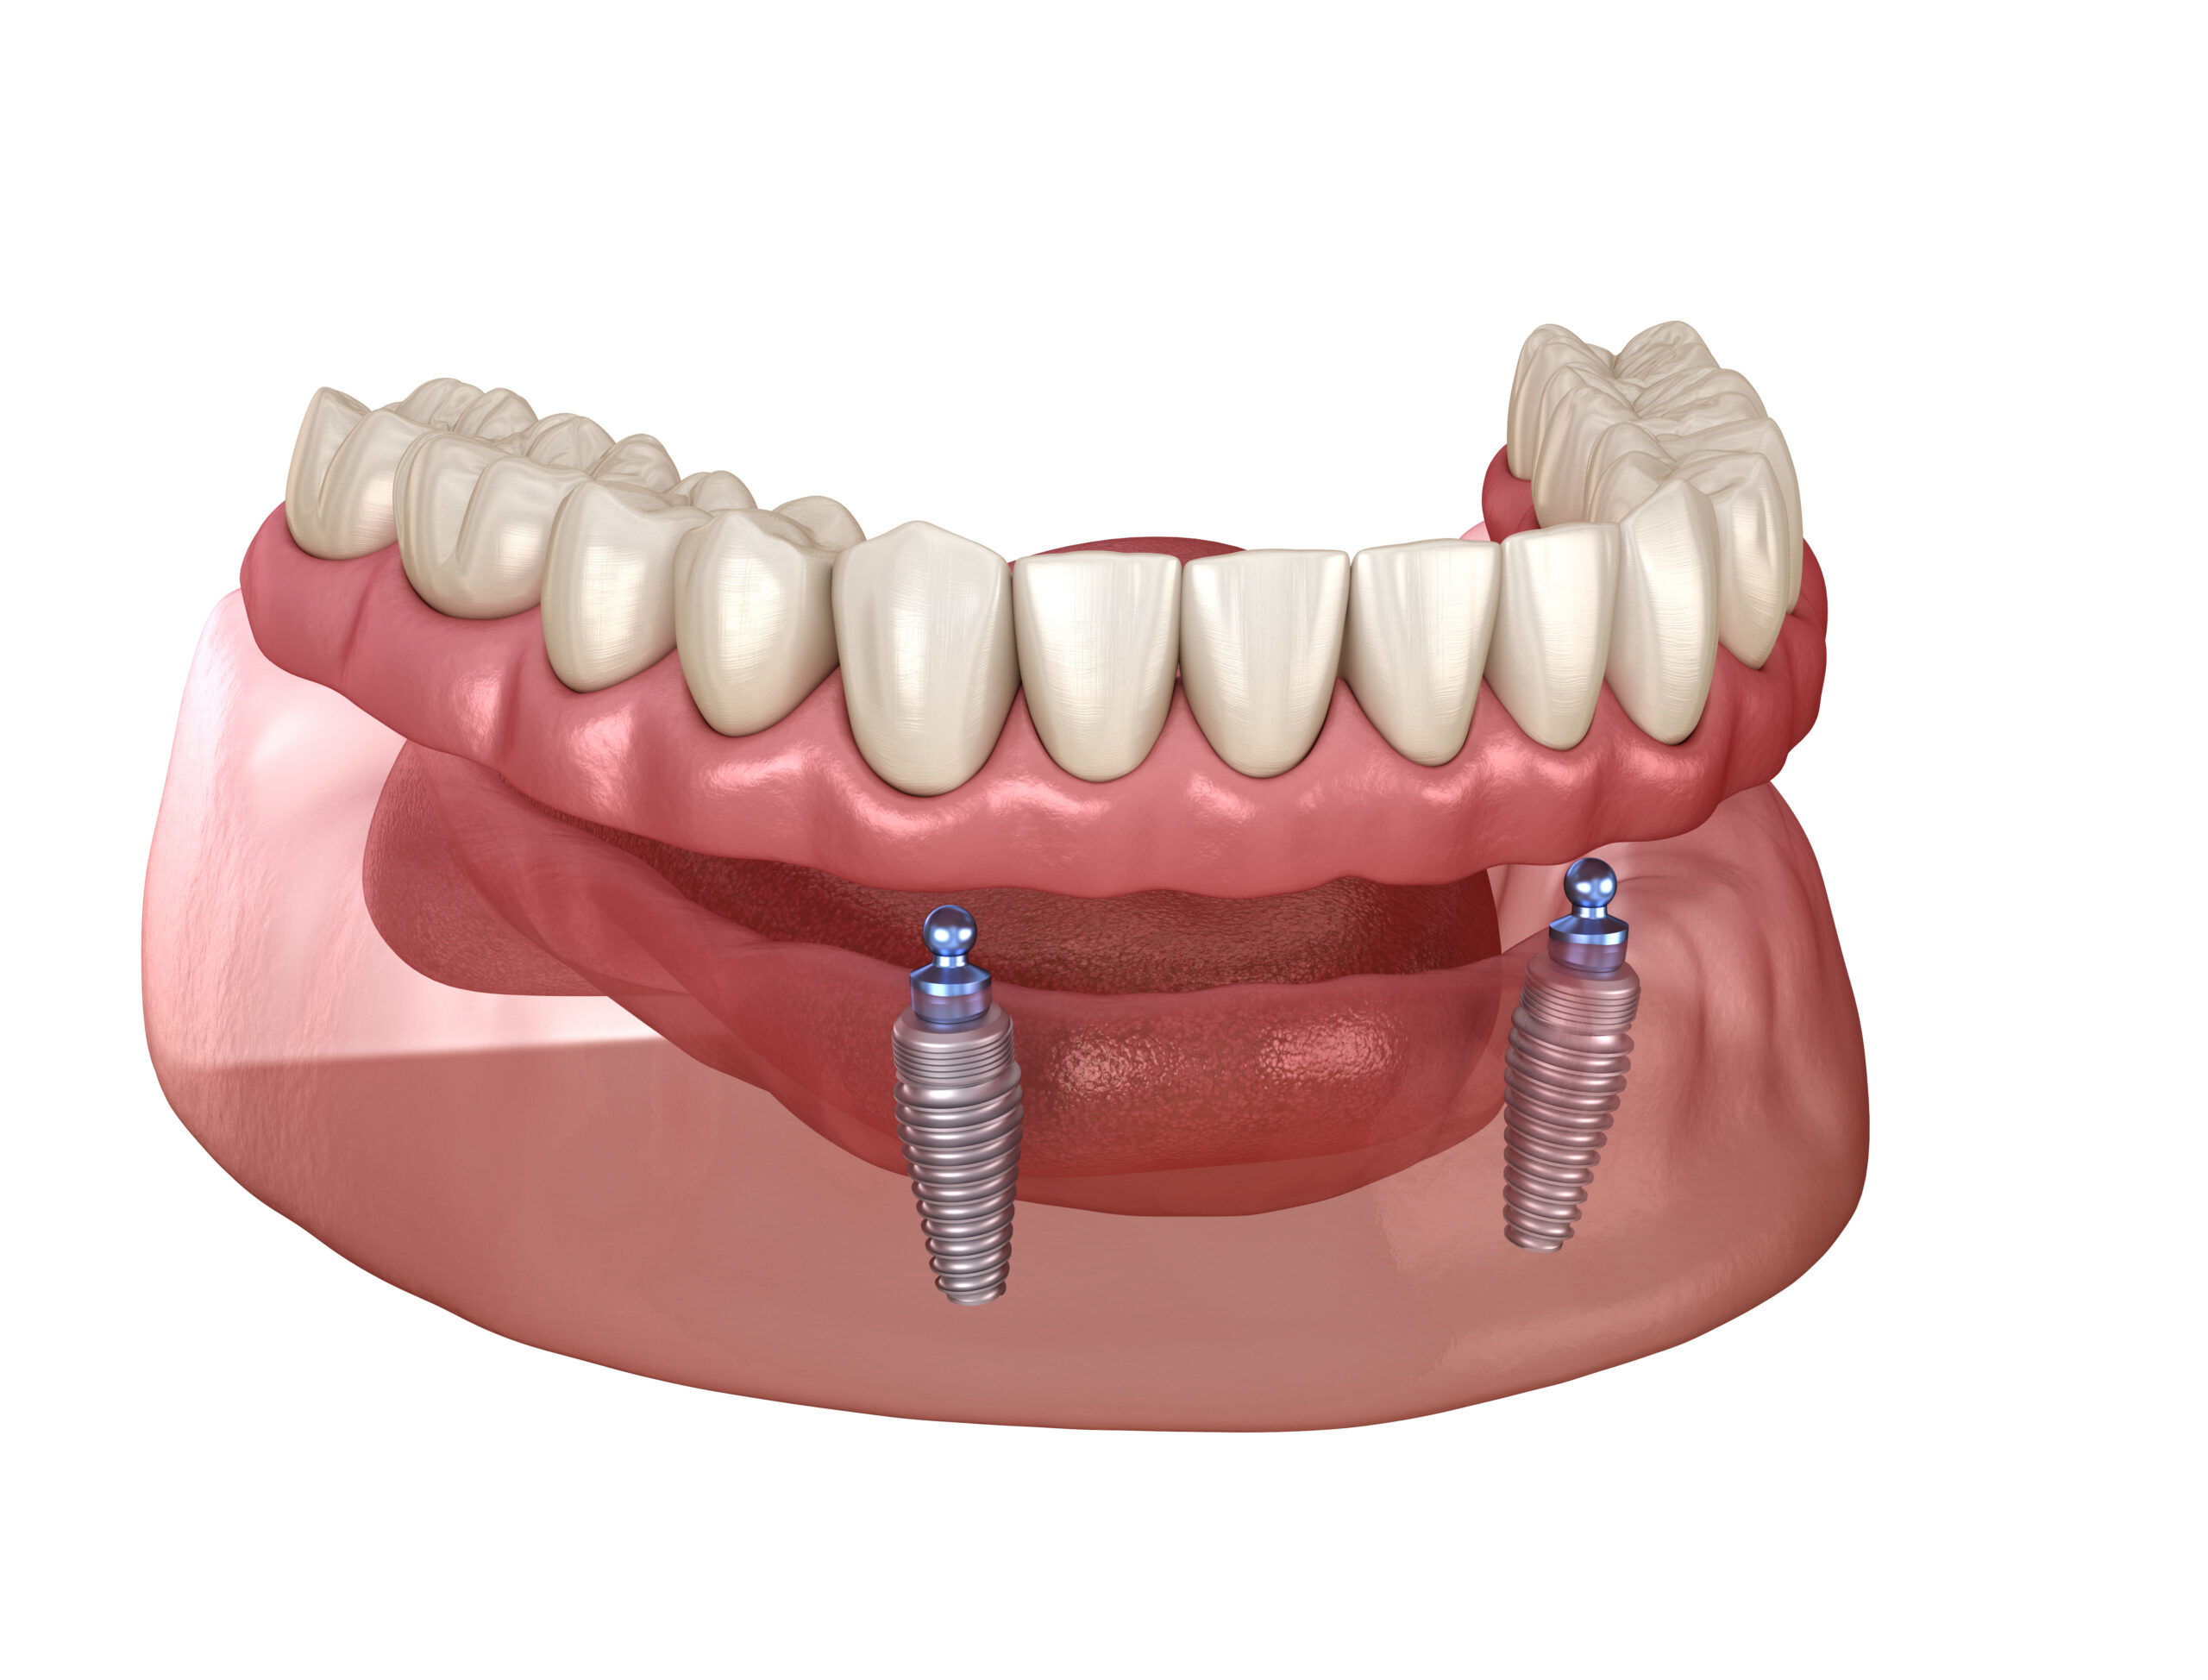 What Are The Components That Make Up Tooth Implants In Baton Rouge, LA?